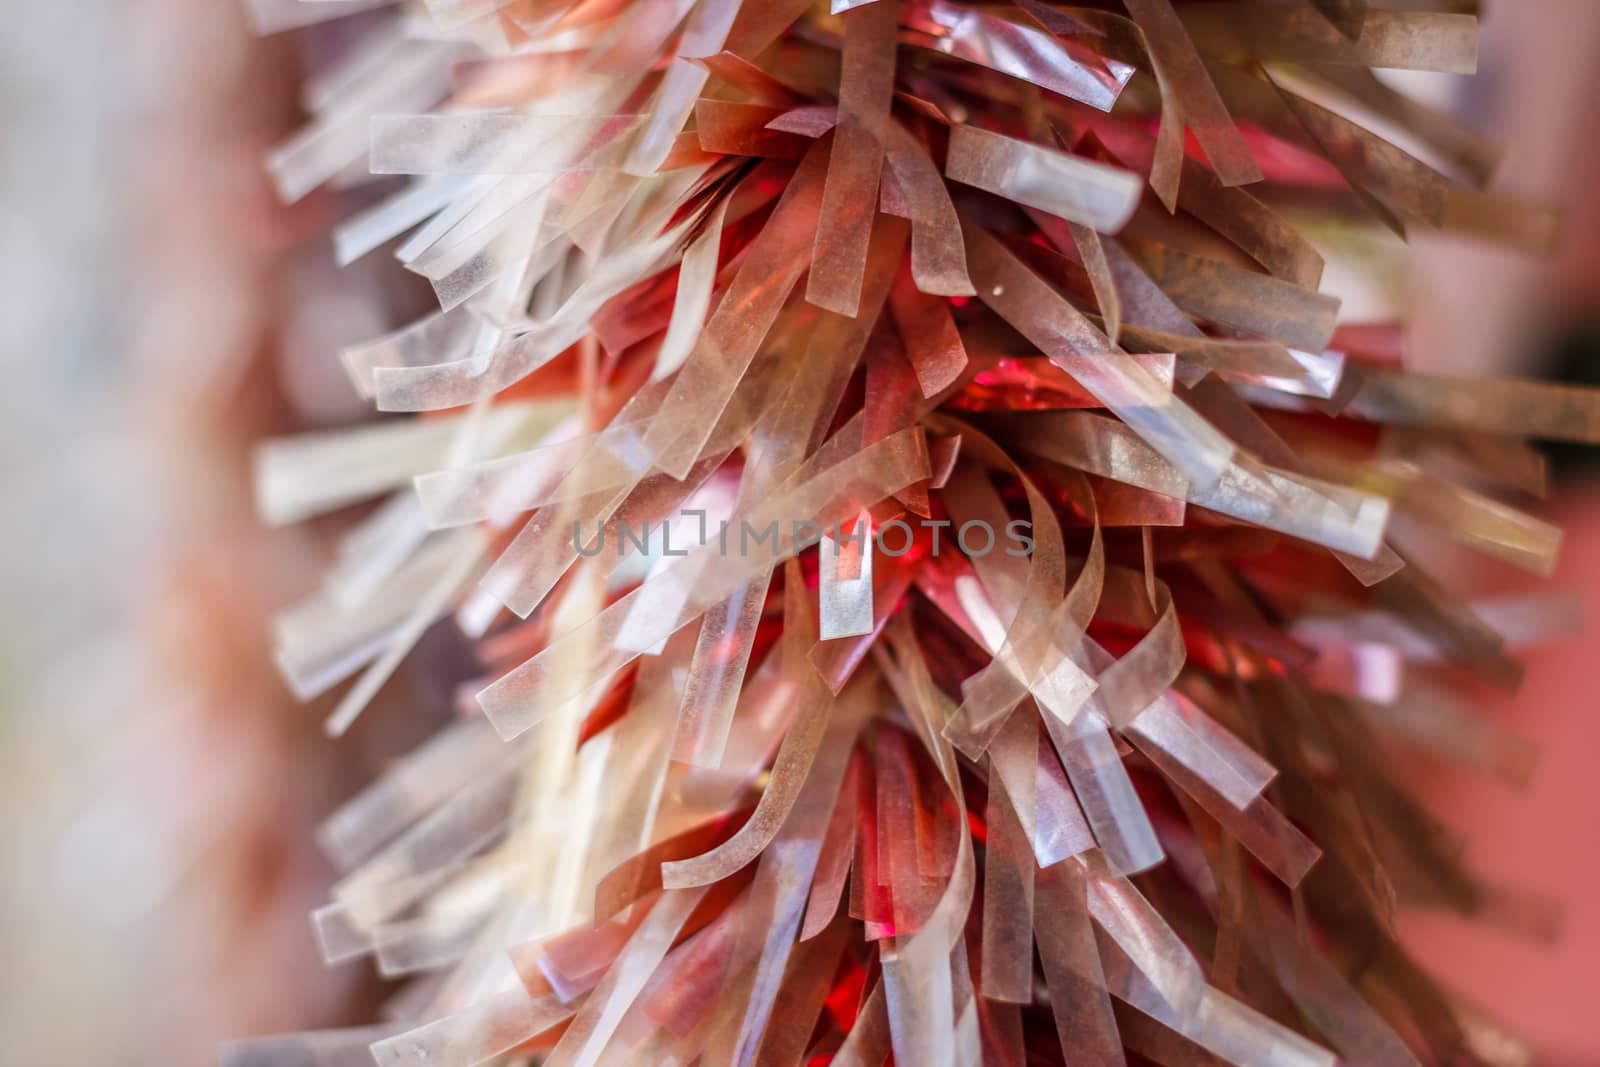 the texture of the old red and white tinsel